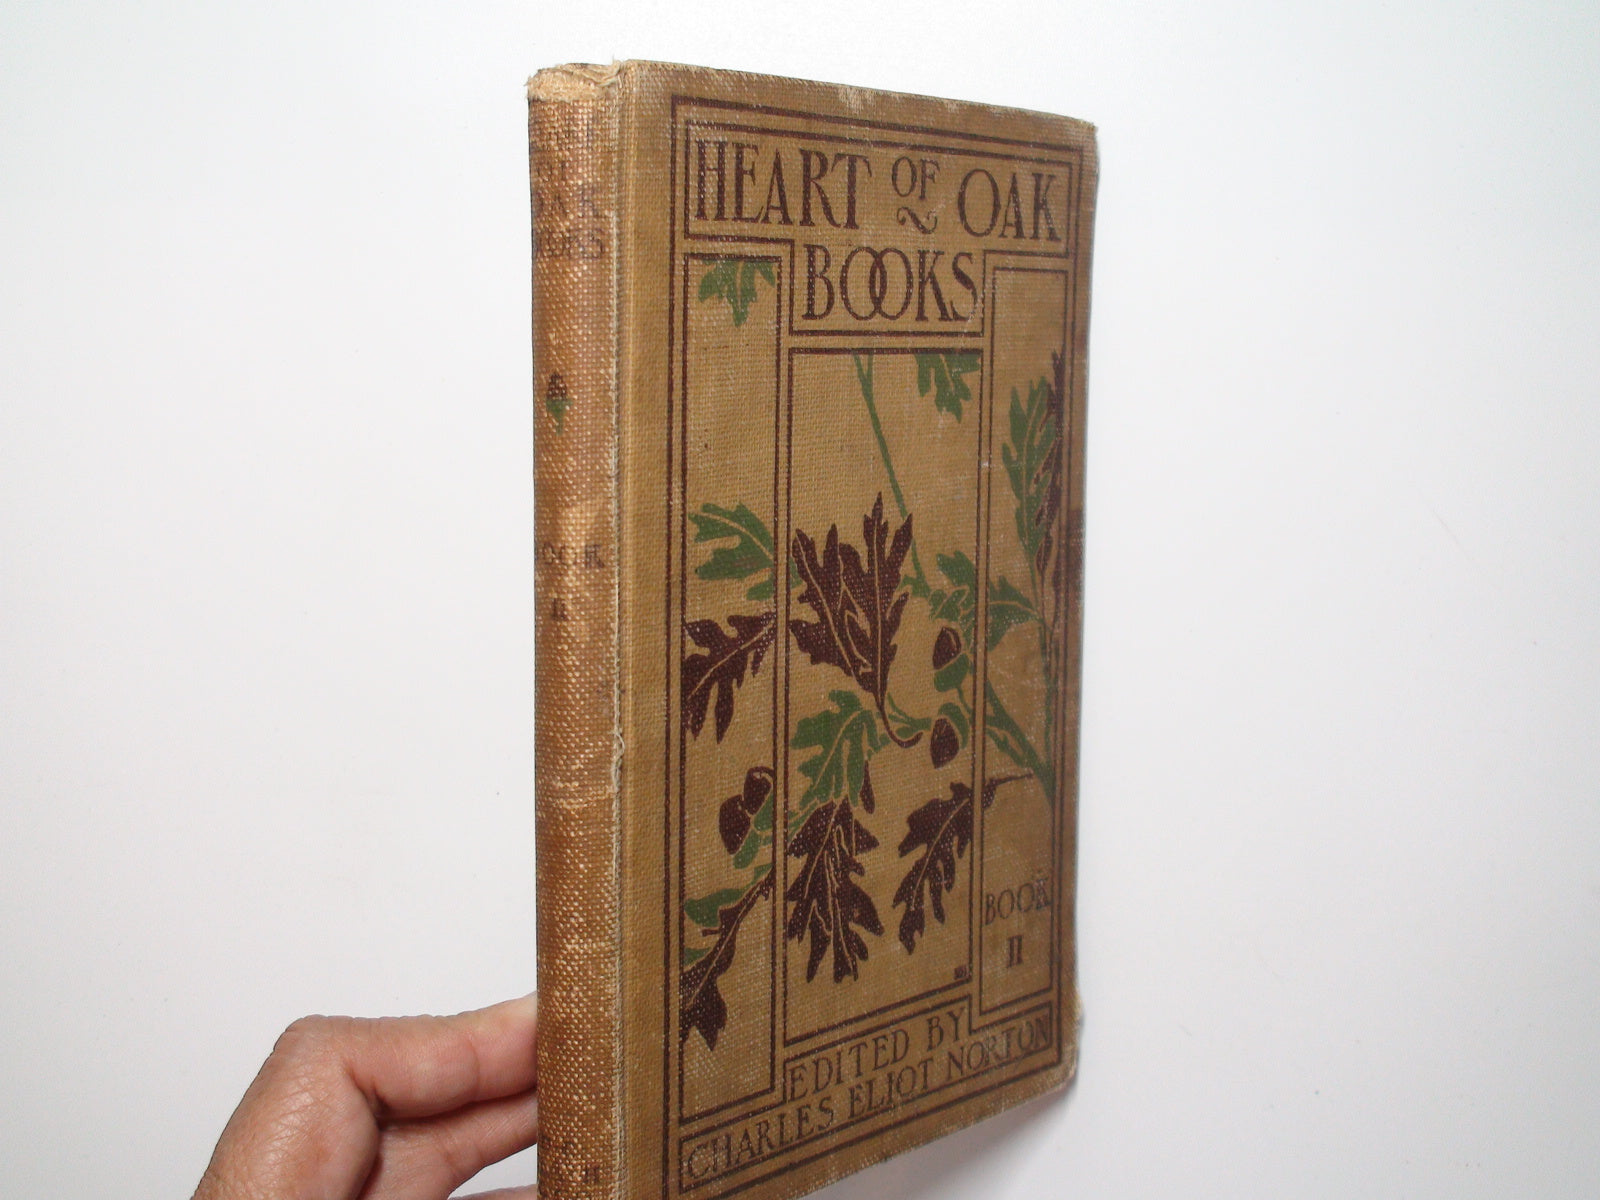 The Heart of Oak Books, Ed by Charles Eliot Norton, 2nd Book, Illustrated, 1902